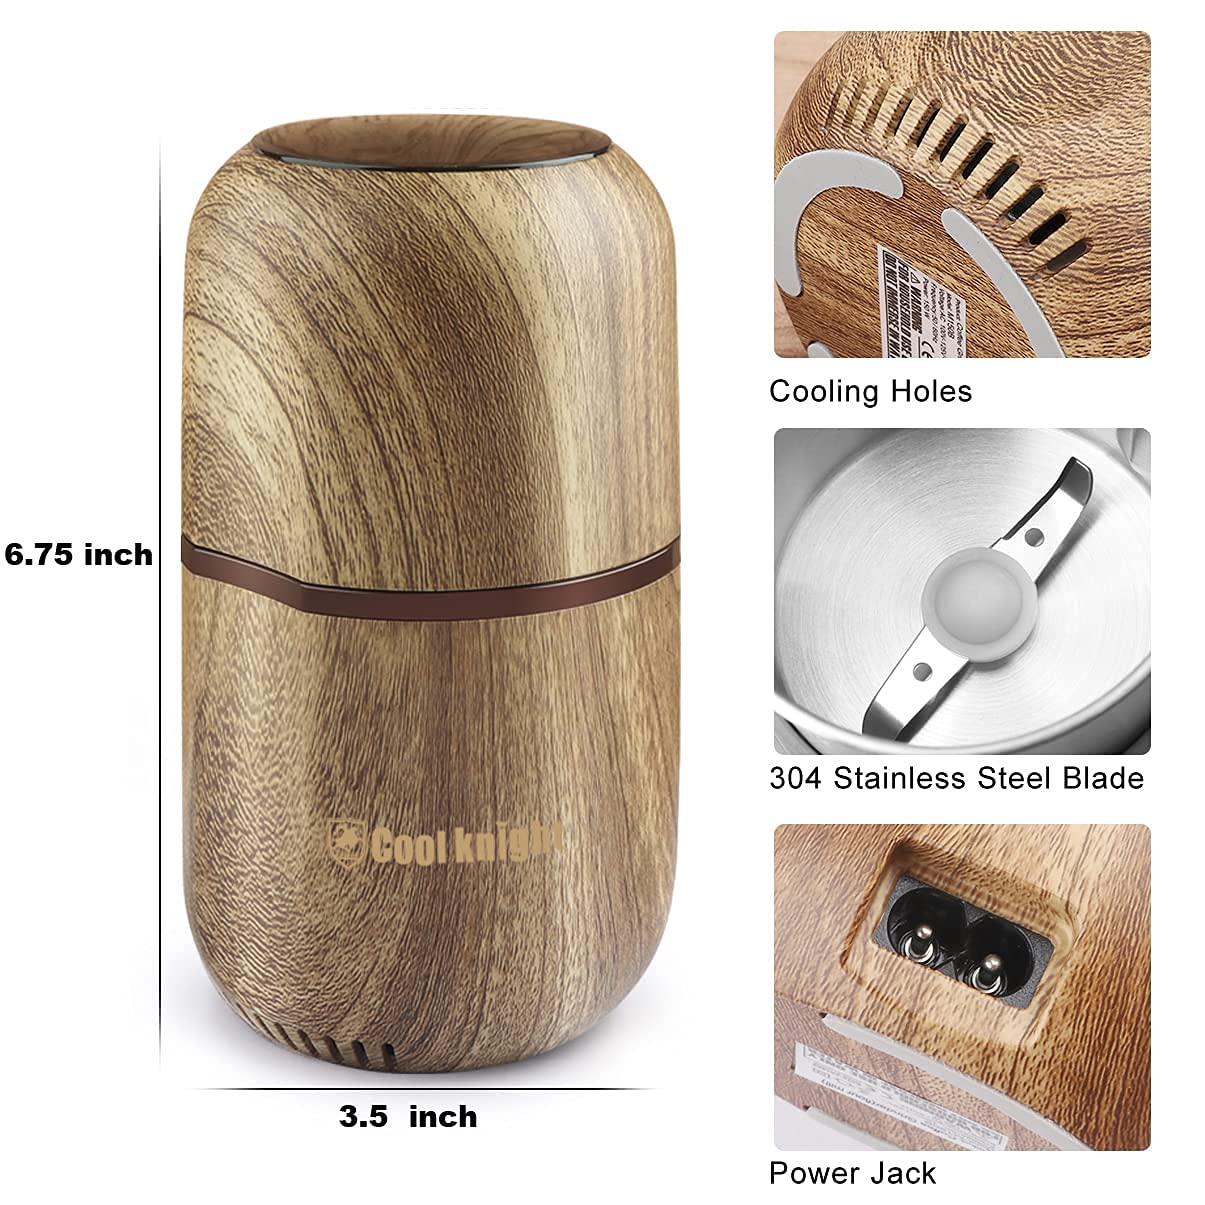 COOL KNIGHT Herb Grinder Electric Spice Grinder [Large Capacity/High Rotating Speed/Electric]-Electric Grinder for Spices and Herbs (Wood grain 2)